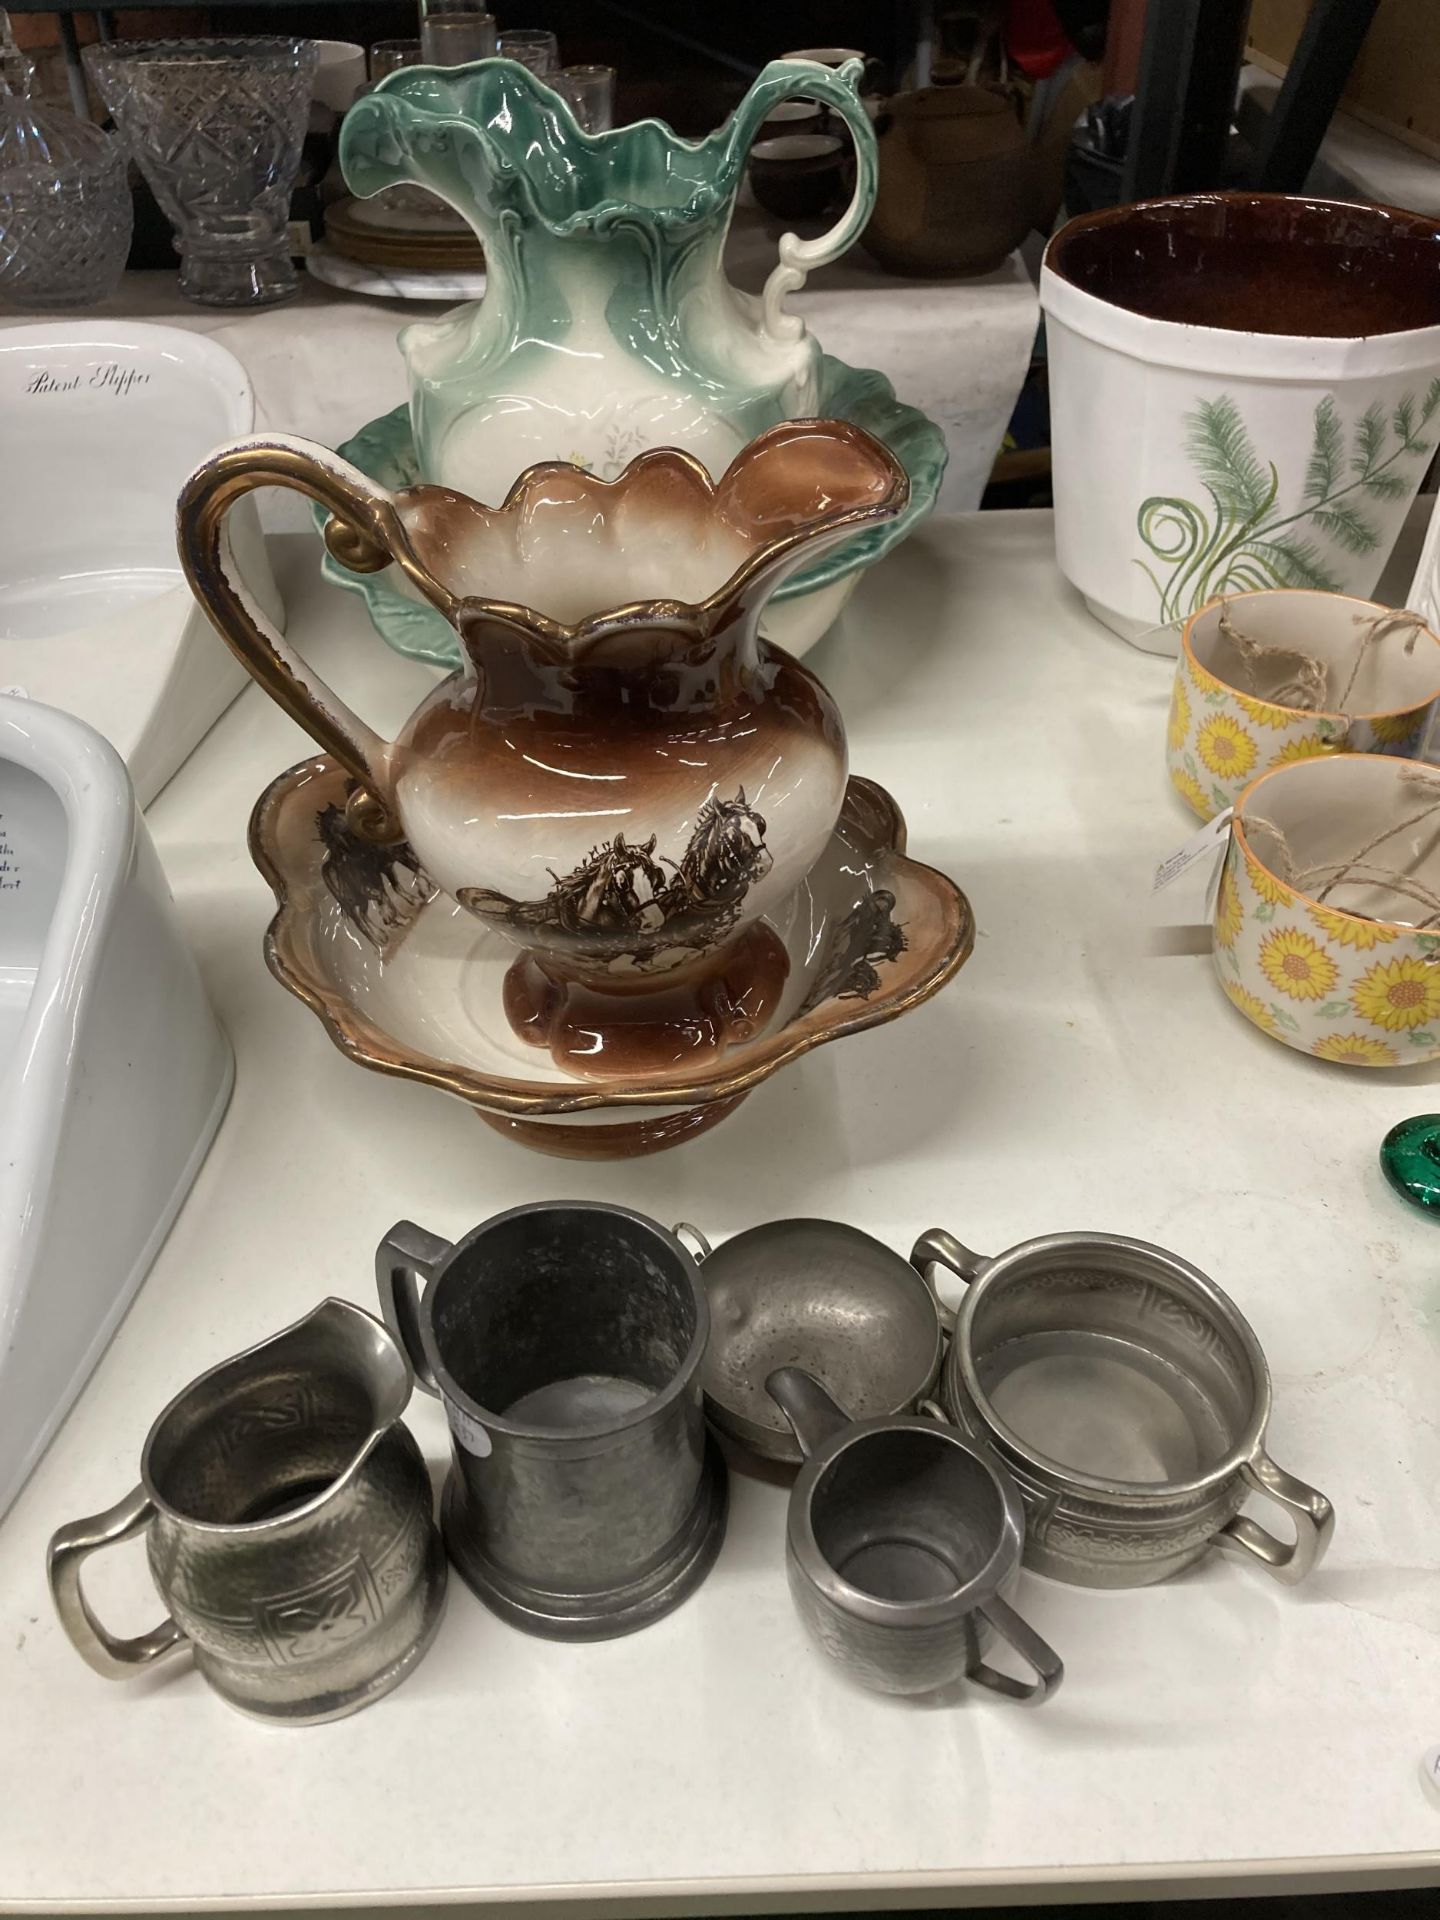 TWO VINTAGE WASH JUG AND BOWL SETS AND A SMALL GROUP OF PEWTER ITEMS